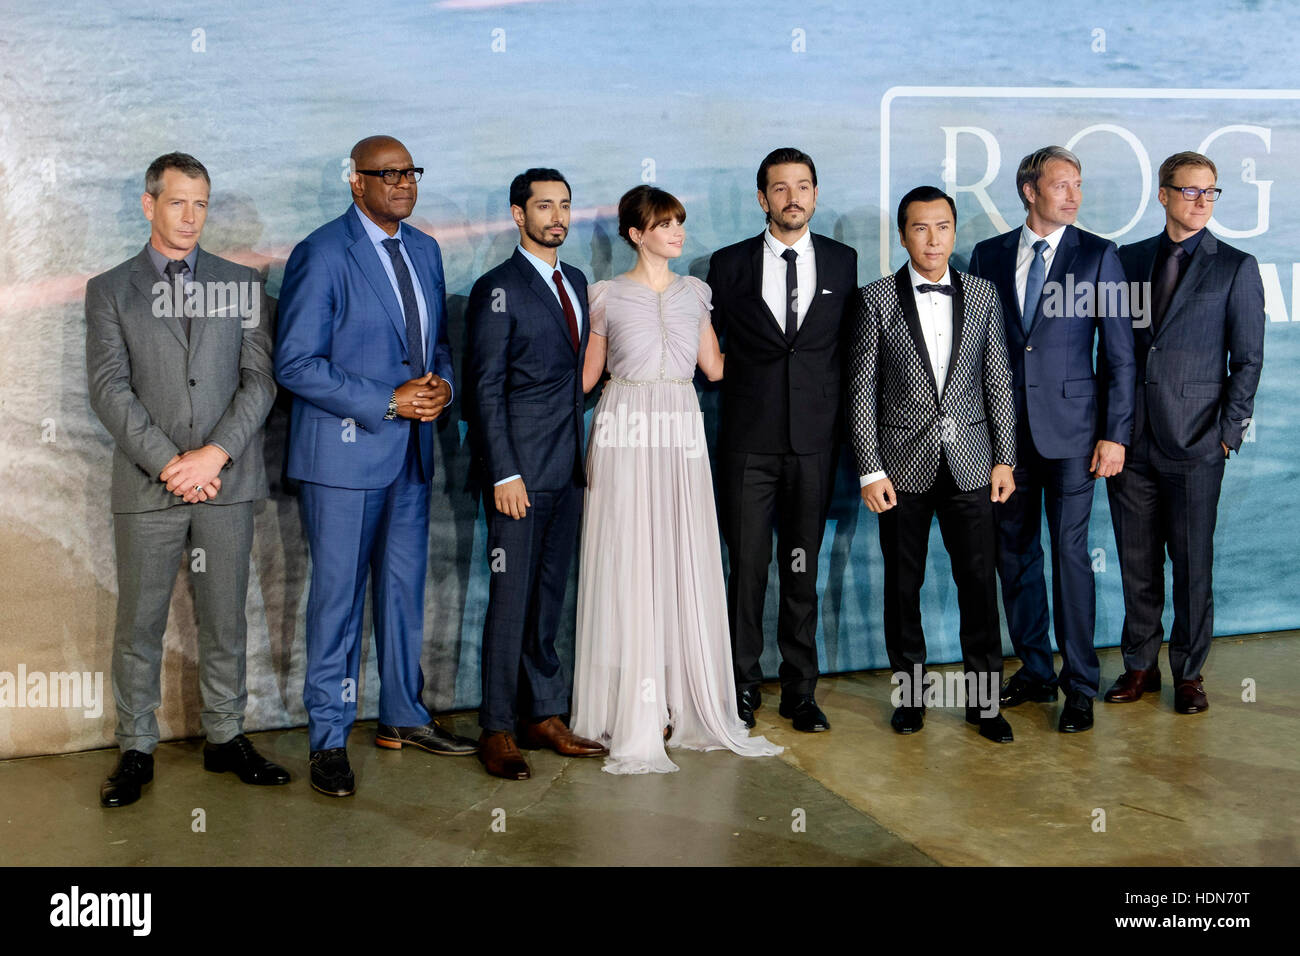 Cast attends the Launch Event of ROGUE ONE: A STAR WARS STORY  on 13/12/2016 at  Tate Modern, Bankside, . Persons pictured: Ben Mendelsohn, Forest Whitaker, Riz Ahmed, Felicity Jones, Diego Luna, Donnie Yen, Mads Mikkelsen, Alan Tudyk . Picture by Julie Edwards/Photoshot Stock Photo